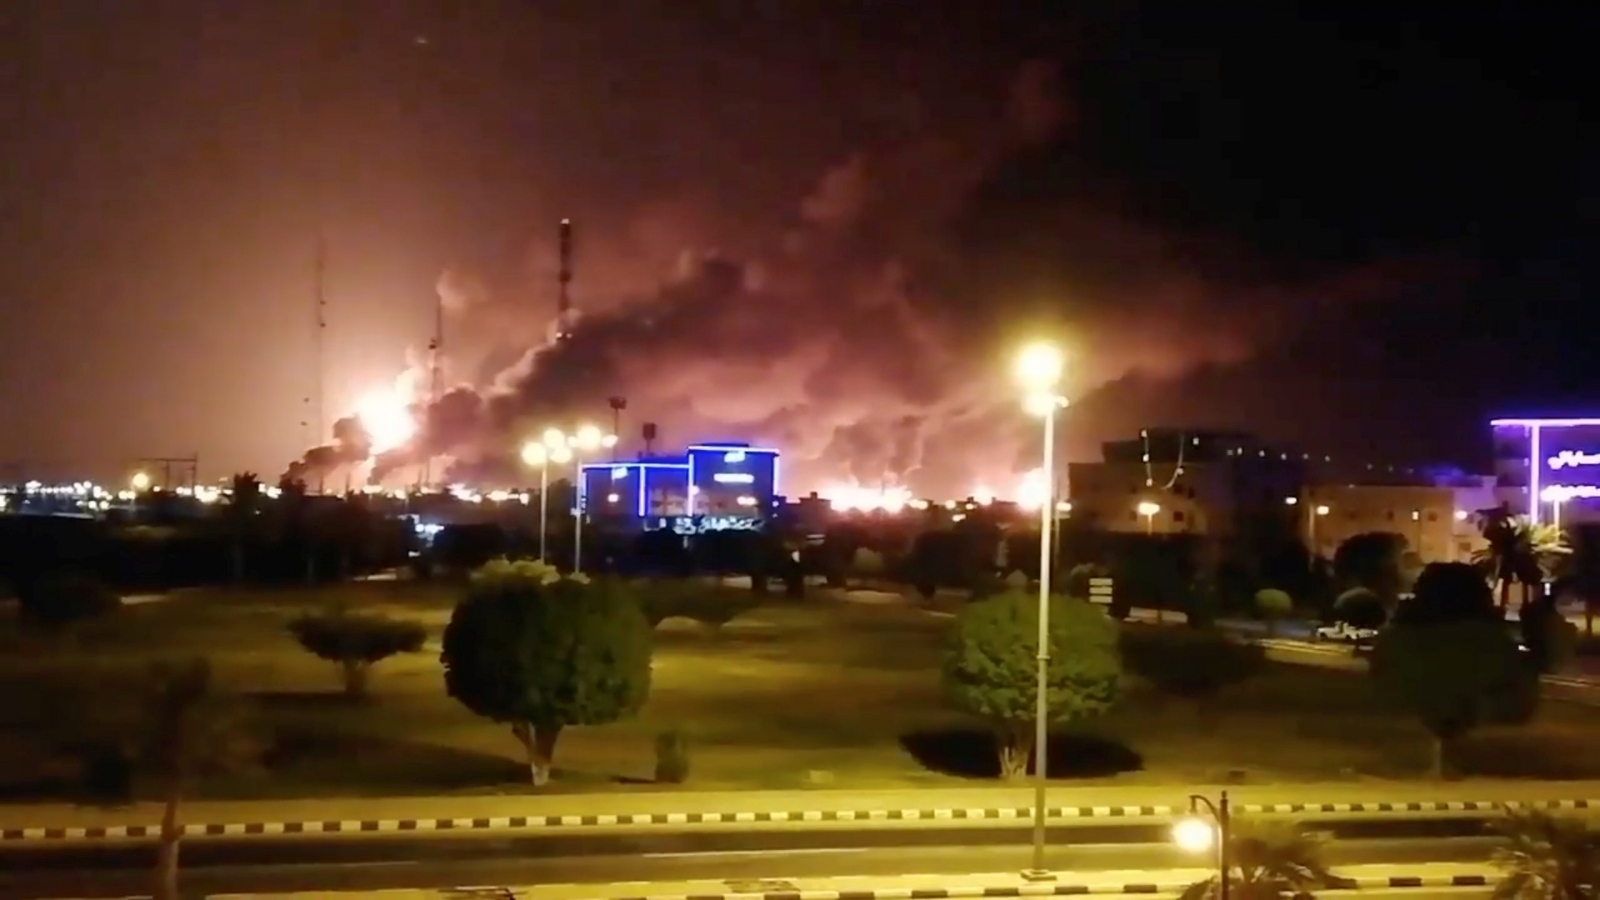 Smoke is seen following a fire at an Aramco factory in Abqaiq Smoke is seen following a fire at an Aramco factory in Abqaiq, Saudi Arabia, September 14, 2019 in this picture obtained from social media. VIDEOS OBTAINED BY REUTERS/via REUTERS ATTENTION EDITORS - THIS IMAGE HAS BEEN SUPPLIED BY A THIRD PARTY. MANDATORY CREDIT. NO RESALES. NO ARCHIVES. VIDEOS OBTAINED BY REUTERS